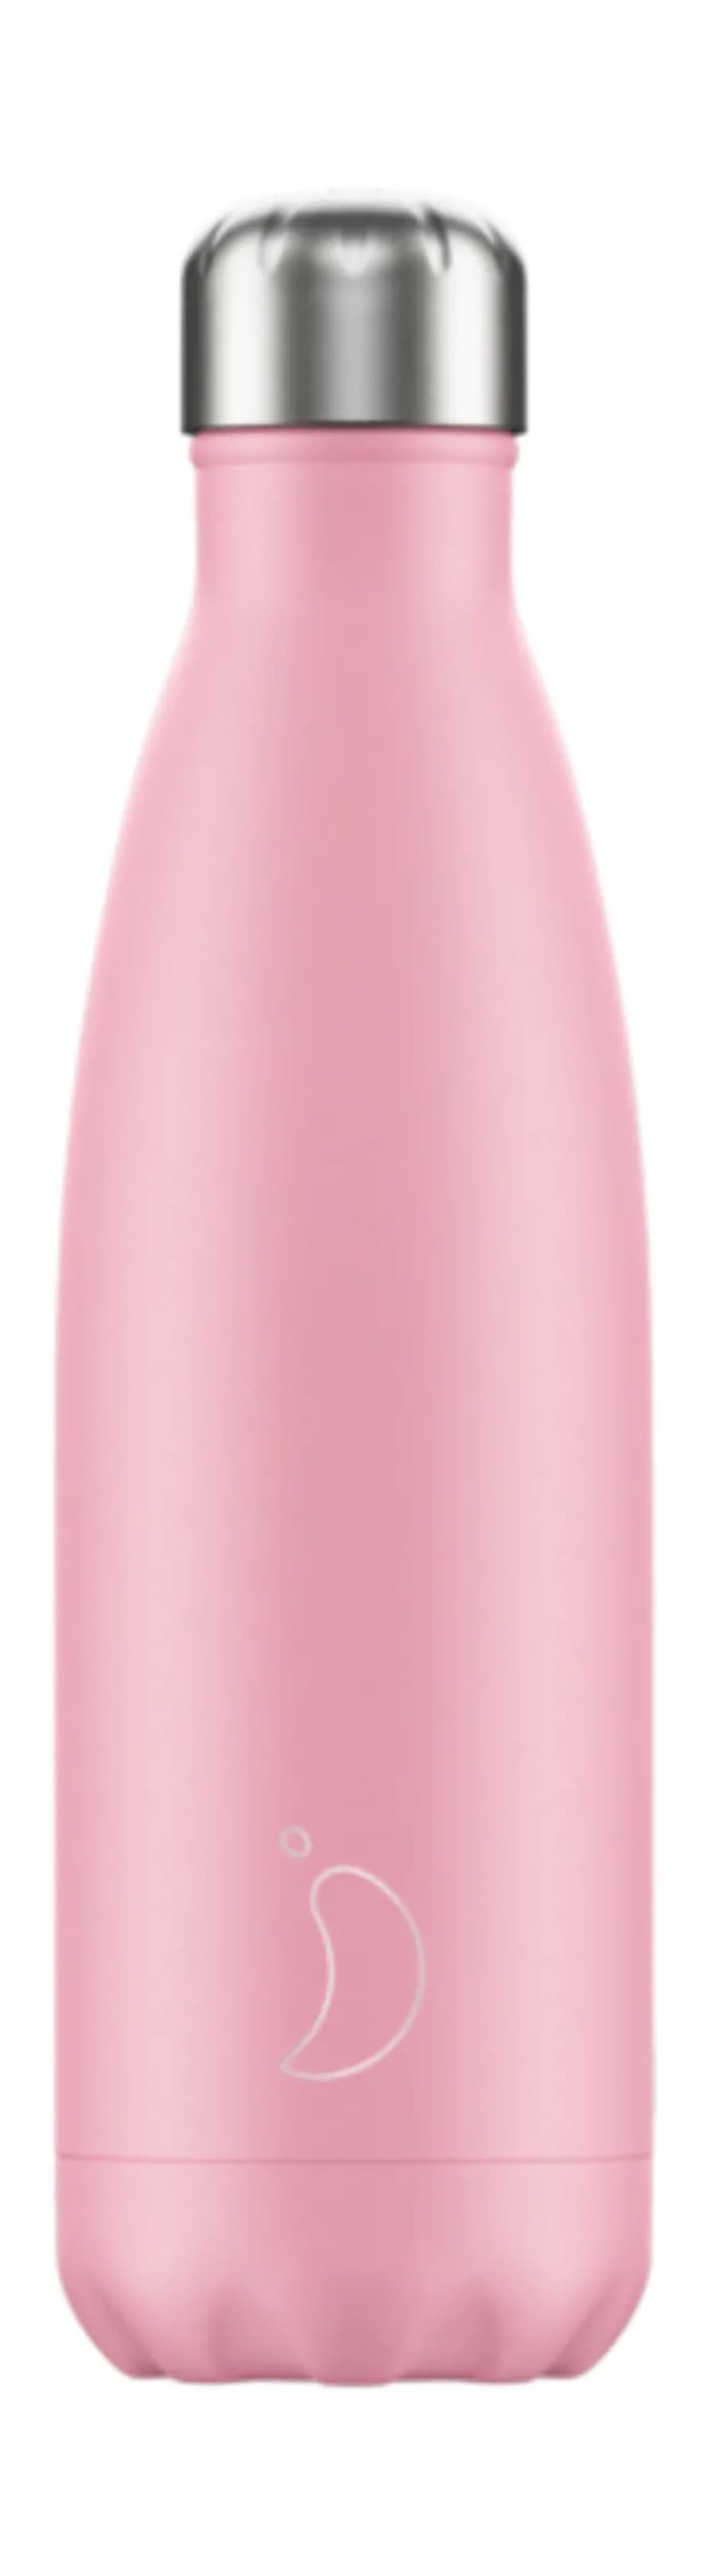 Chilly's 500ml Pink Stainless Steel Pastel Bottle